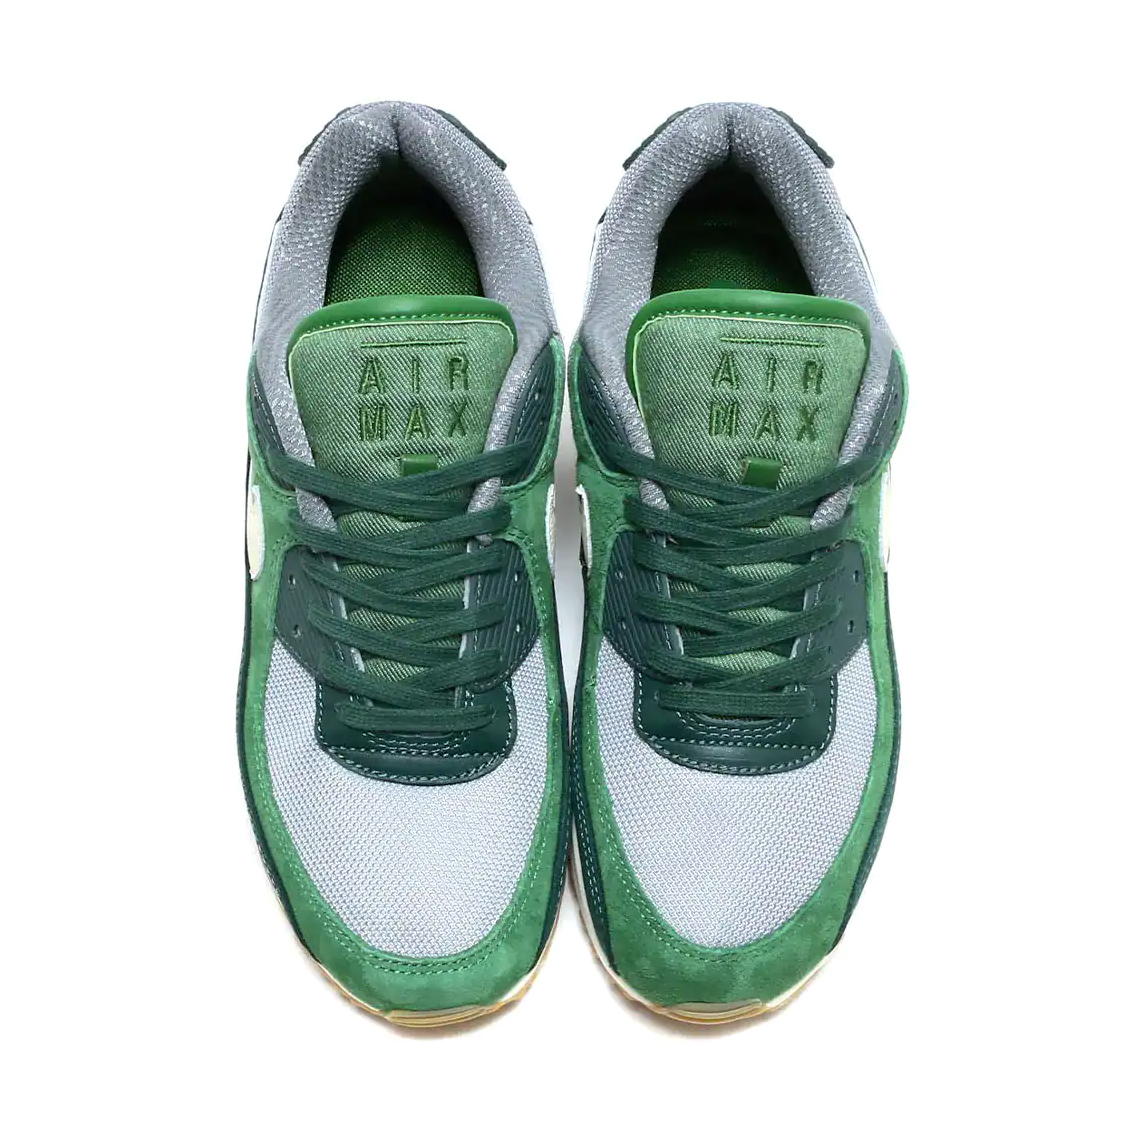 nike air max 90 premium pro green pale ivory forest green dh4621 300 5